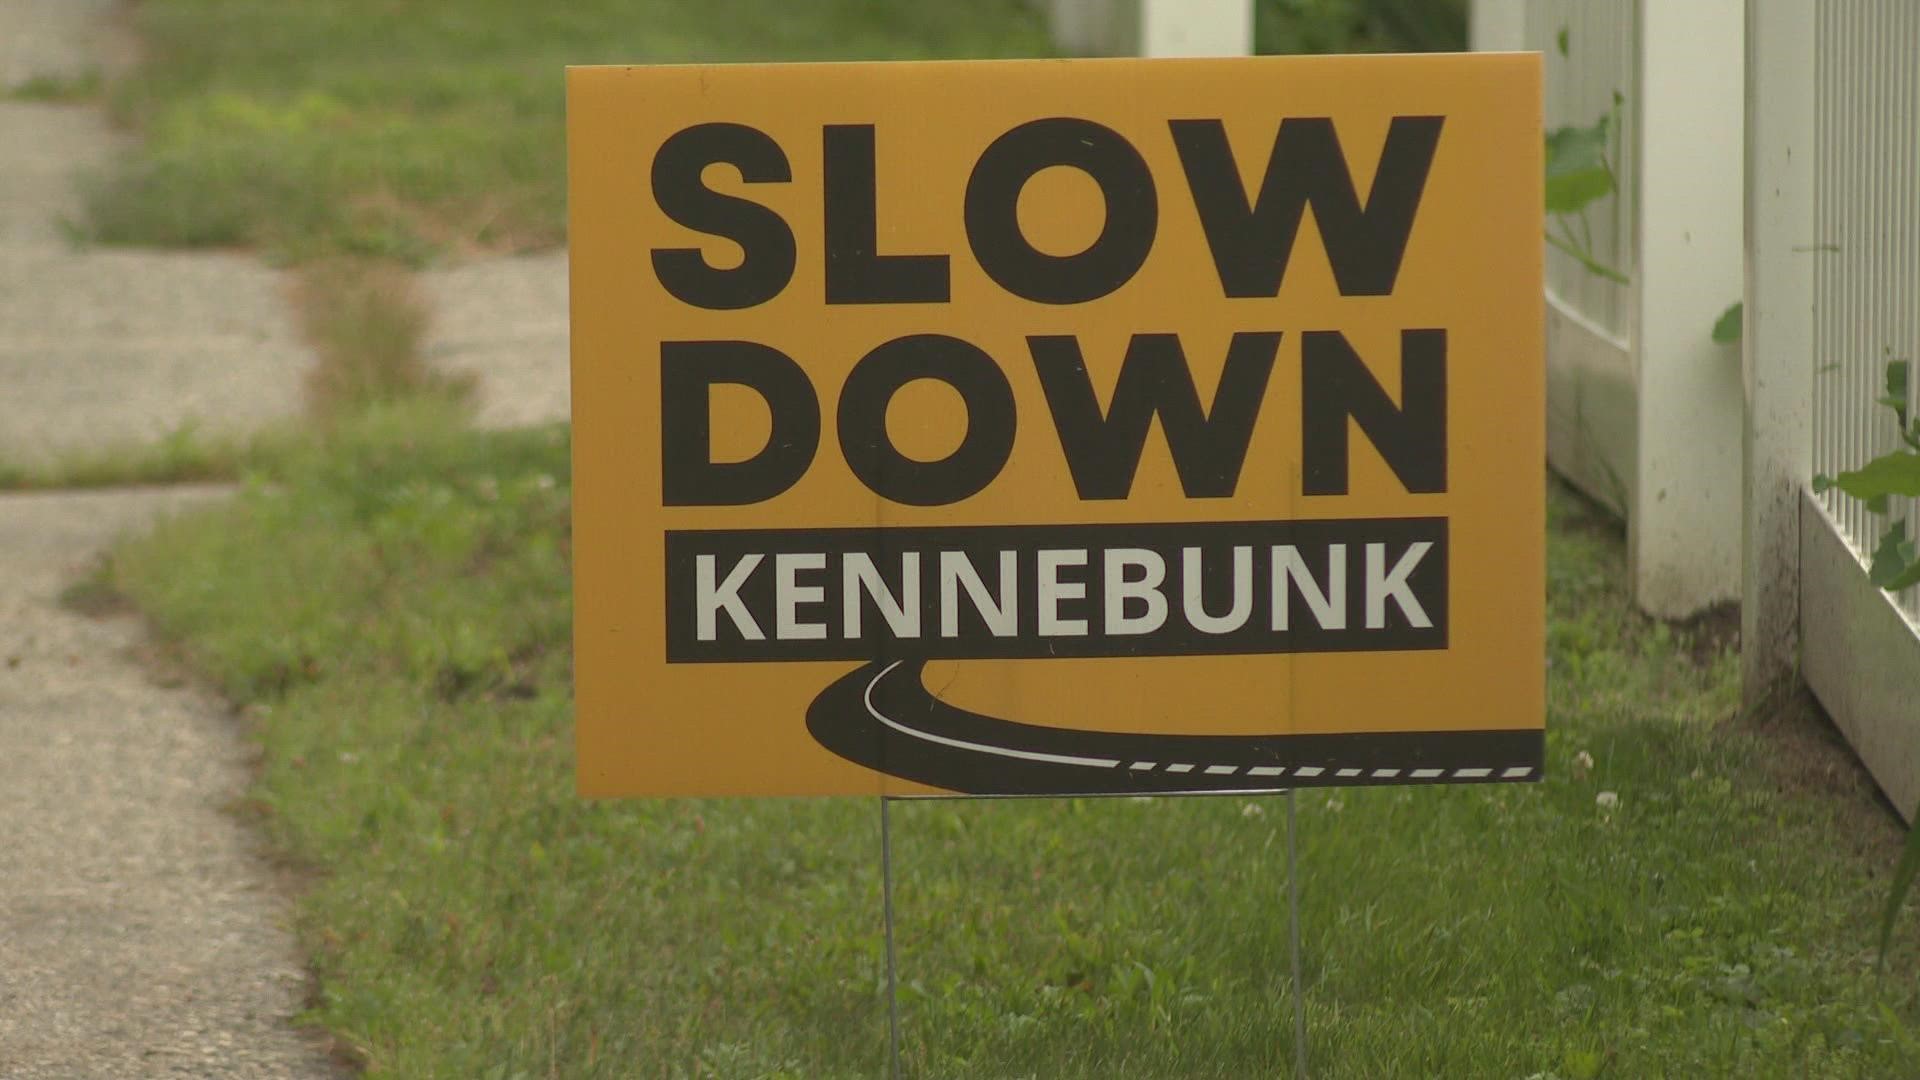 Residents can pick up a 'Slow Down Kennebunk' yard sign at the Kennebunk police station and town office.